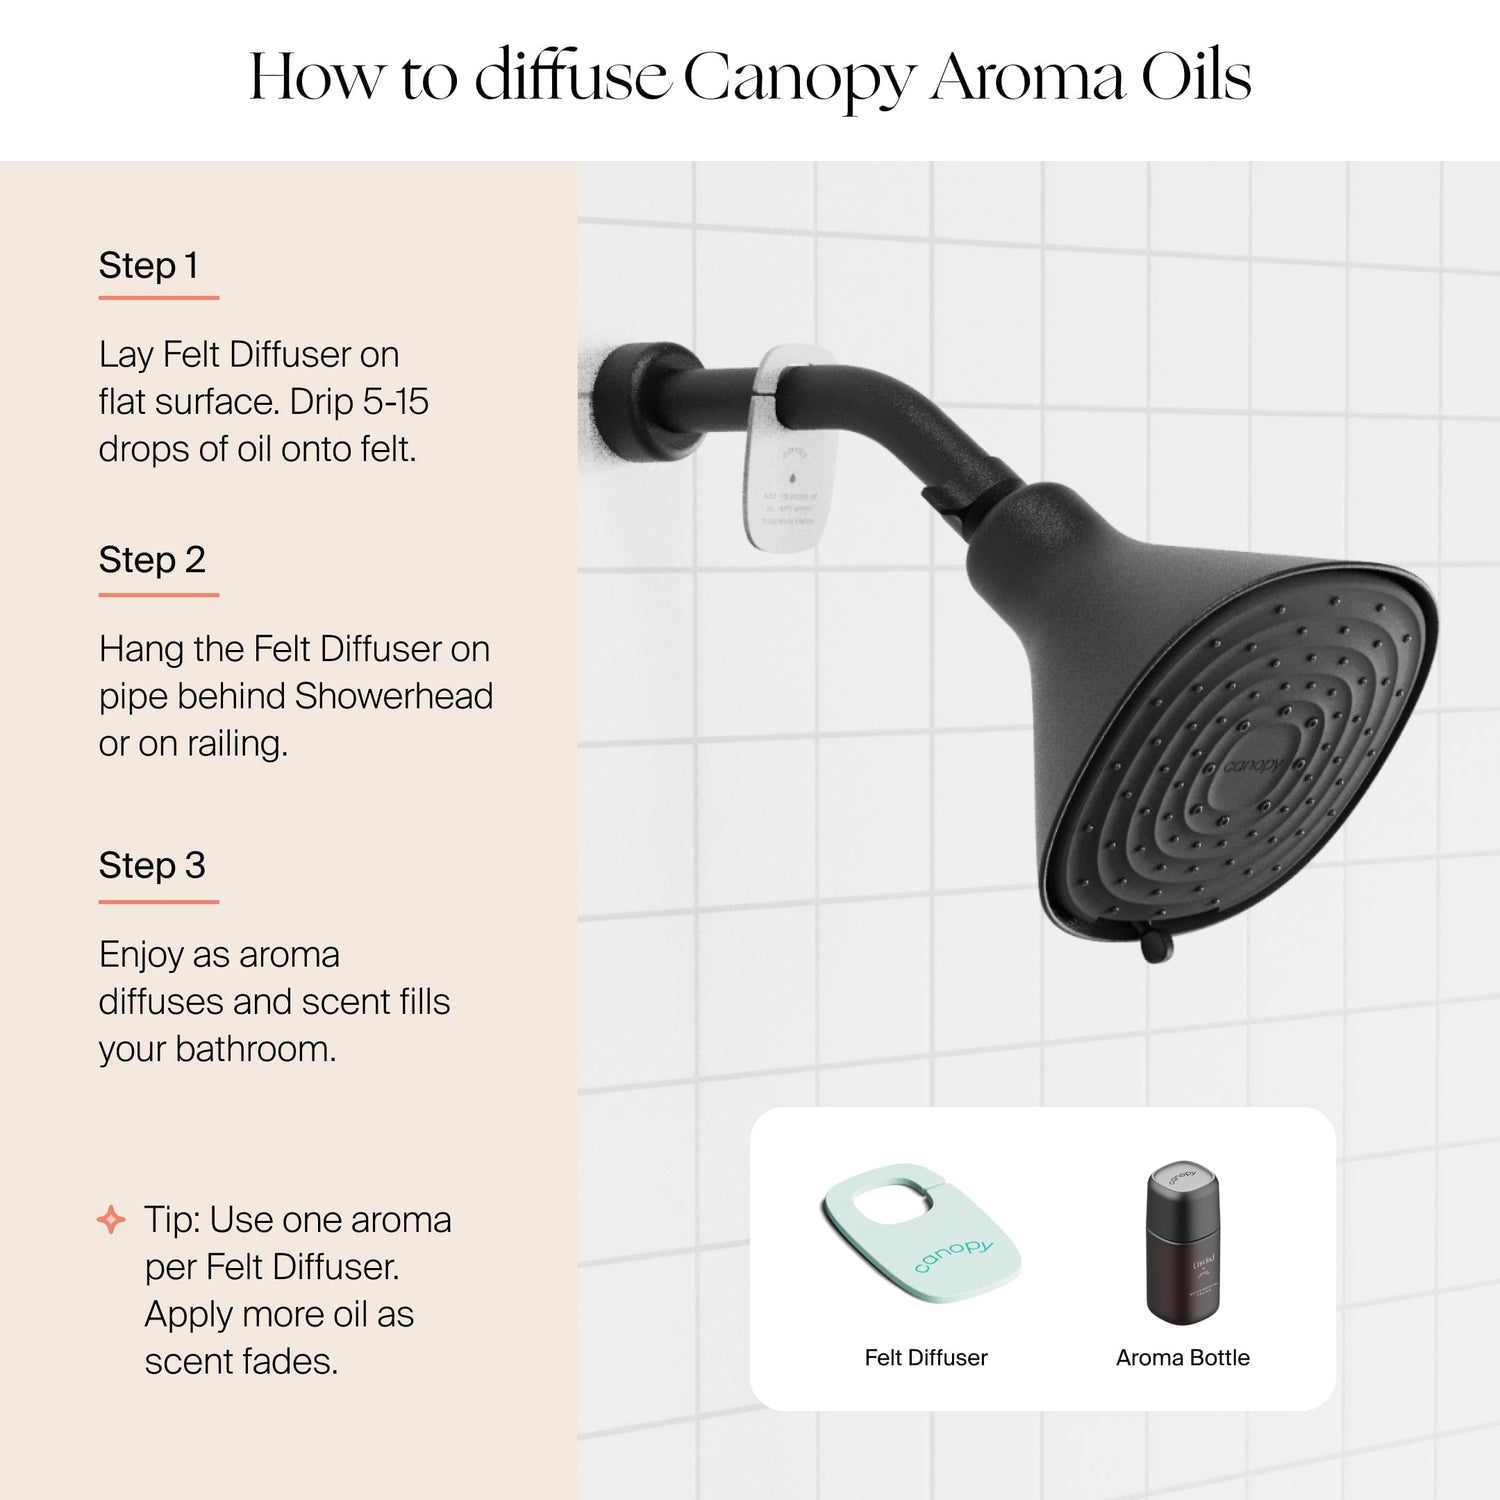 Filtered Showerhead Bundle | Lifestyle, Diffusing Canopy Aromas